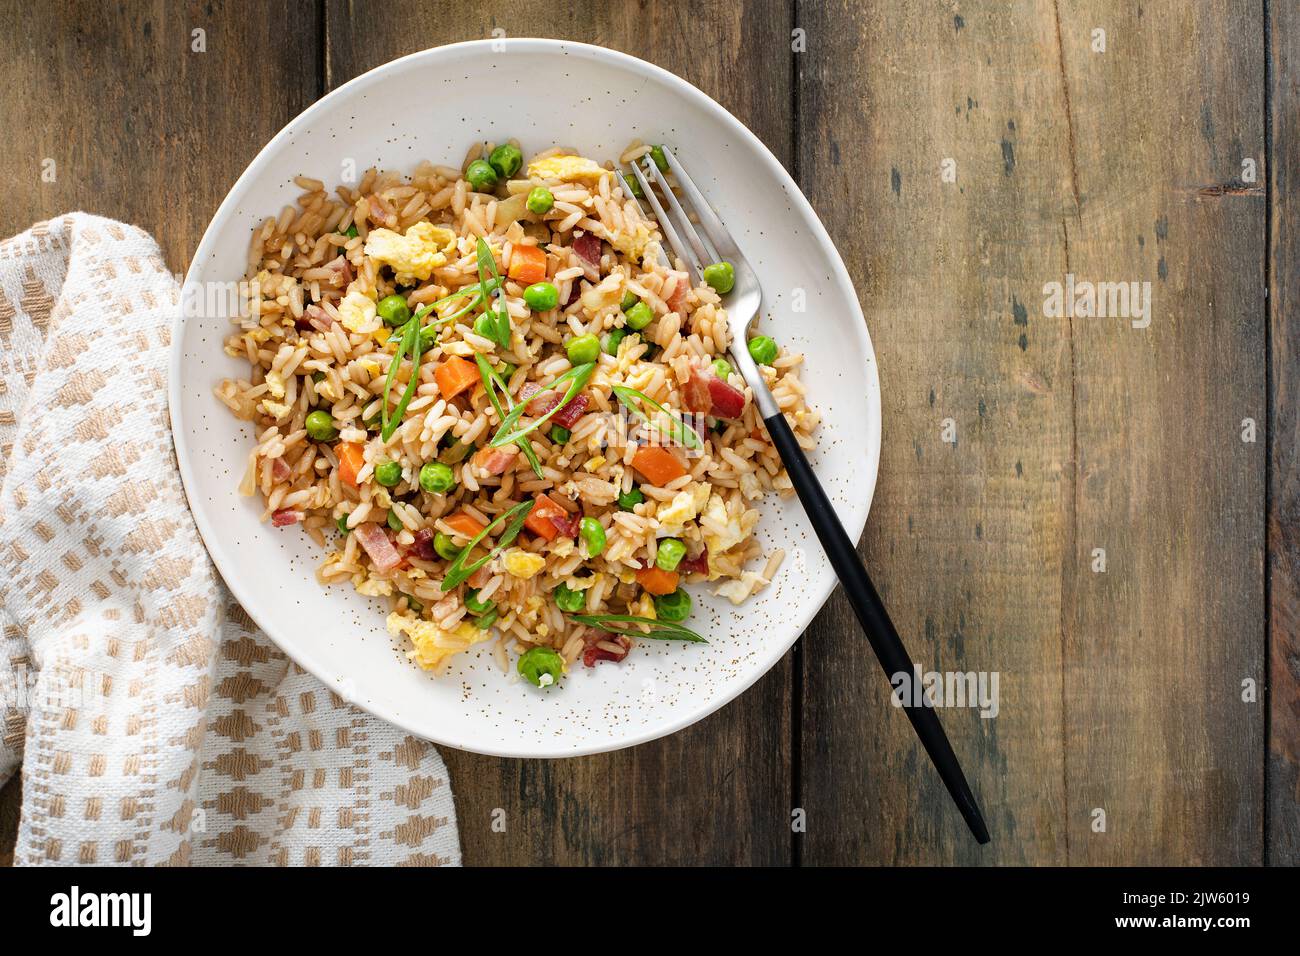 Breakfast fried rice with eggs and bacon Stock Photo